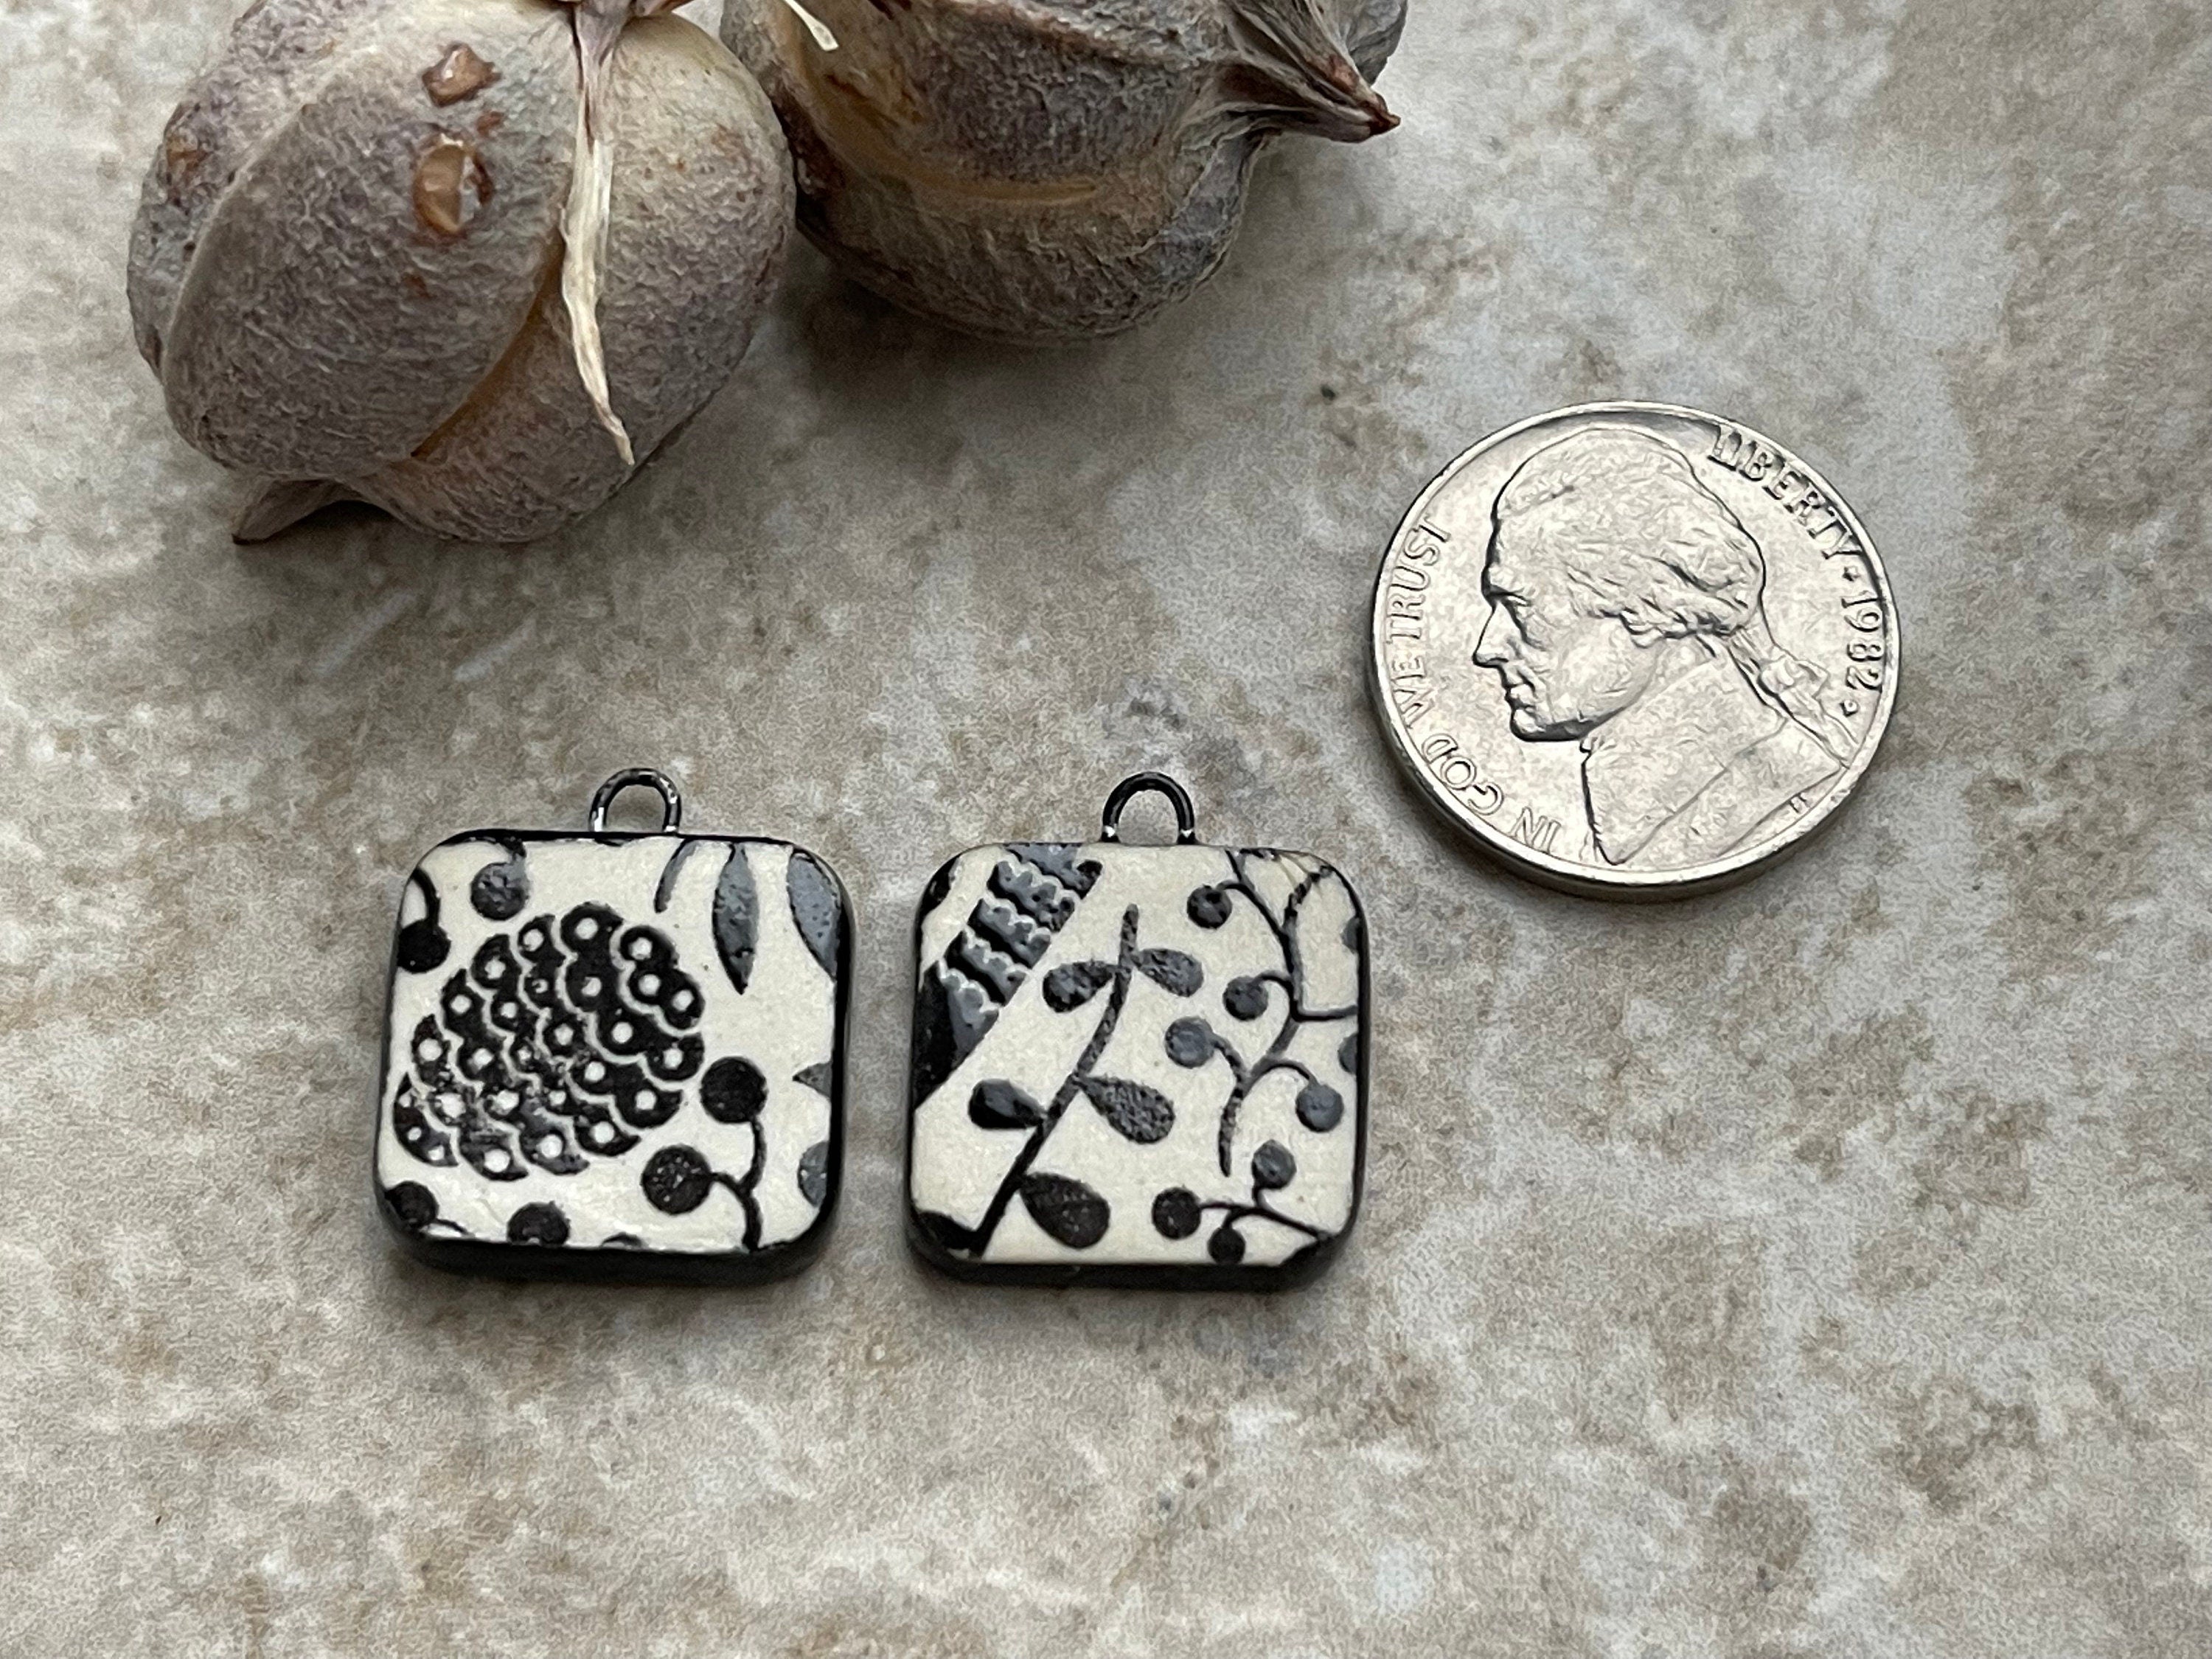 Pinecone Beads, Black and White Square, Black Earring Bead Pair, Unique Bead, Porcelain Ceramic Charms, Jewelry Components, Beading Handmade